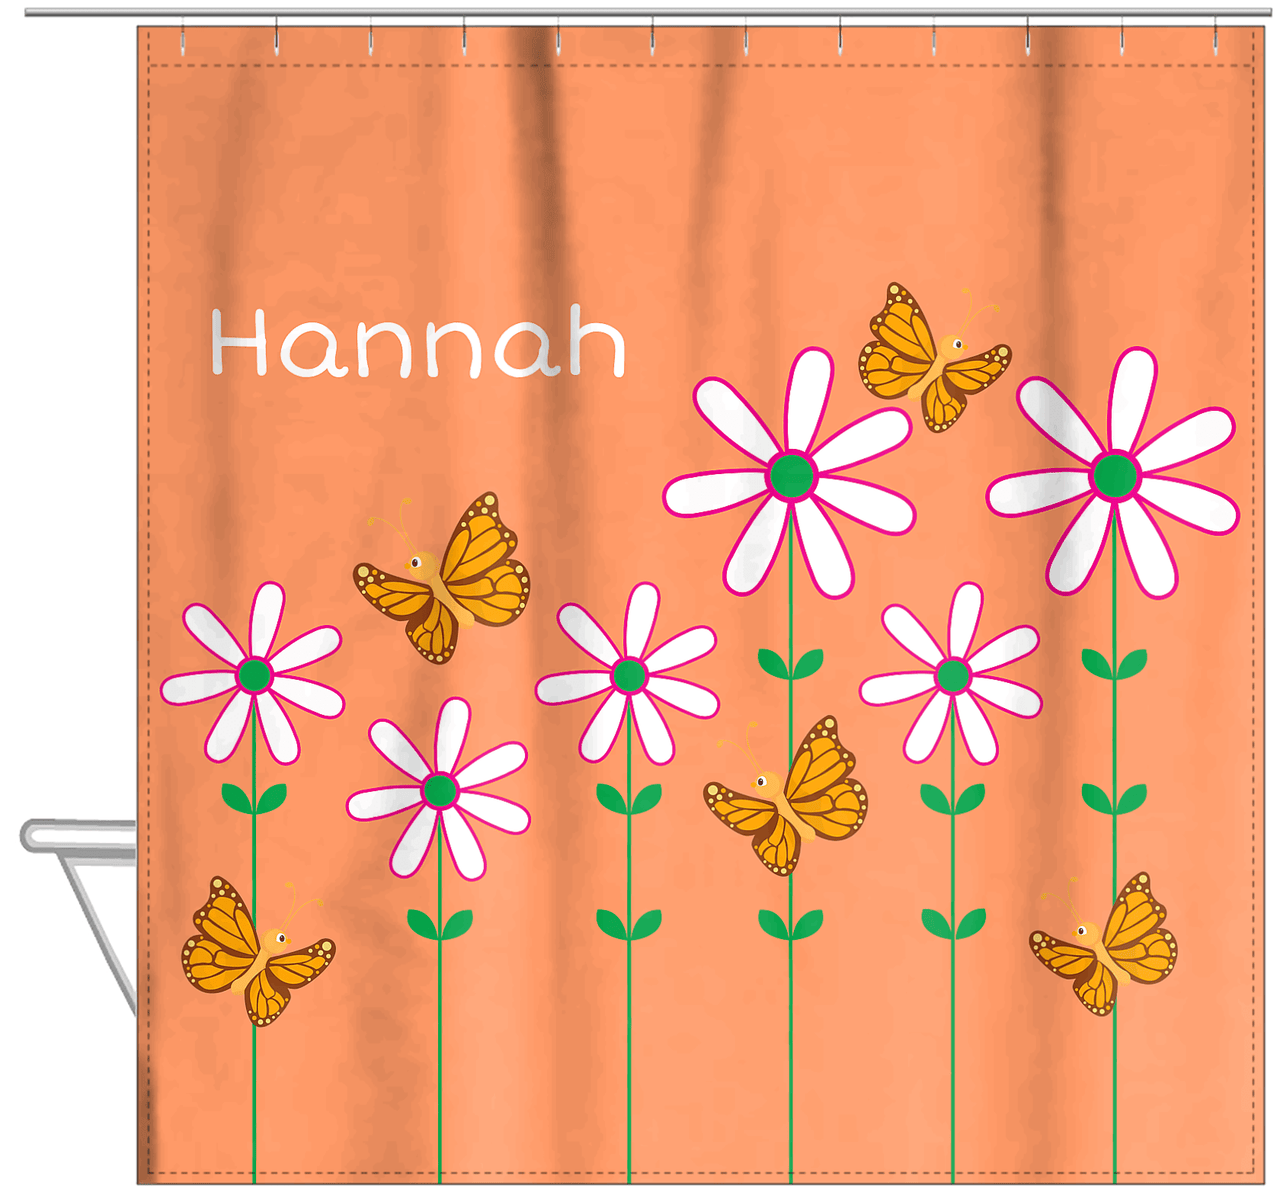 Personalized Butterfly Shower Curtain V - Orange Background - Orange Butterflies - Hanging View